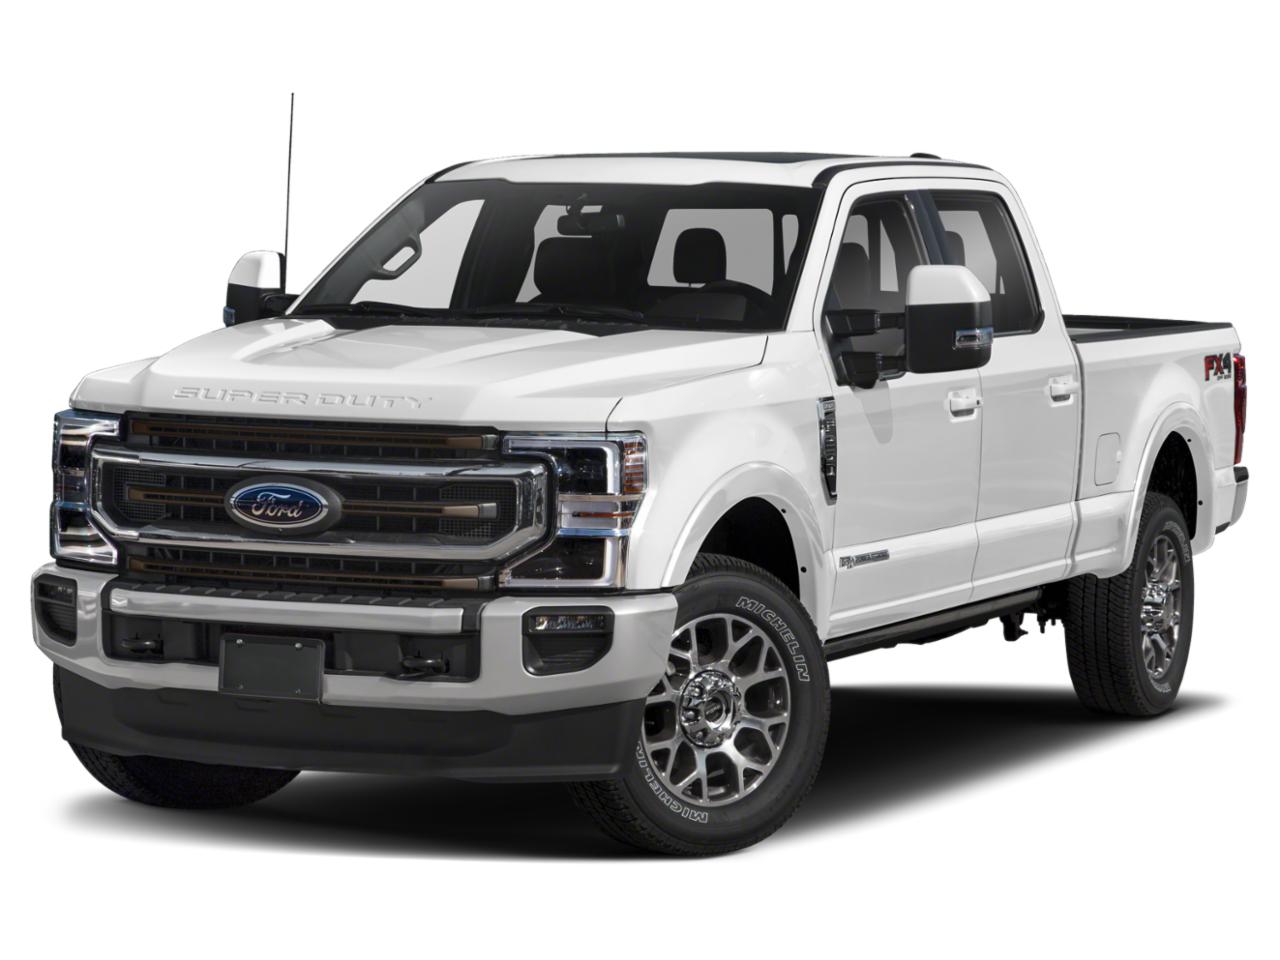 2020 Ford Super Duty F-350 DRW Vehicle Photo in Terrell, TX 75160